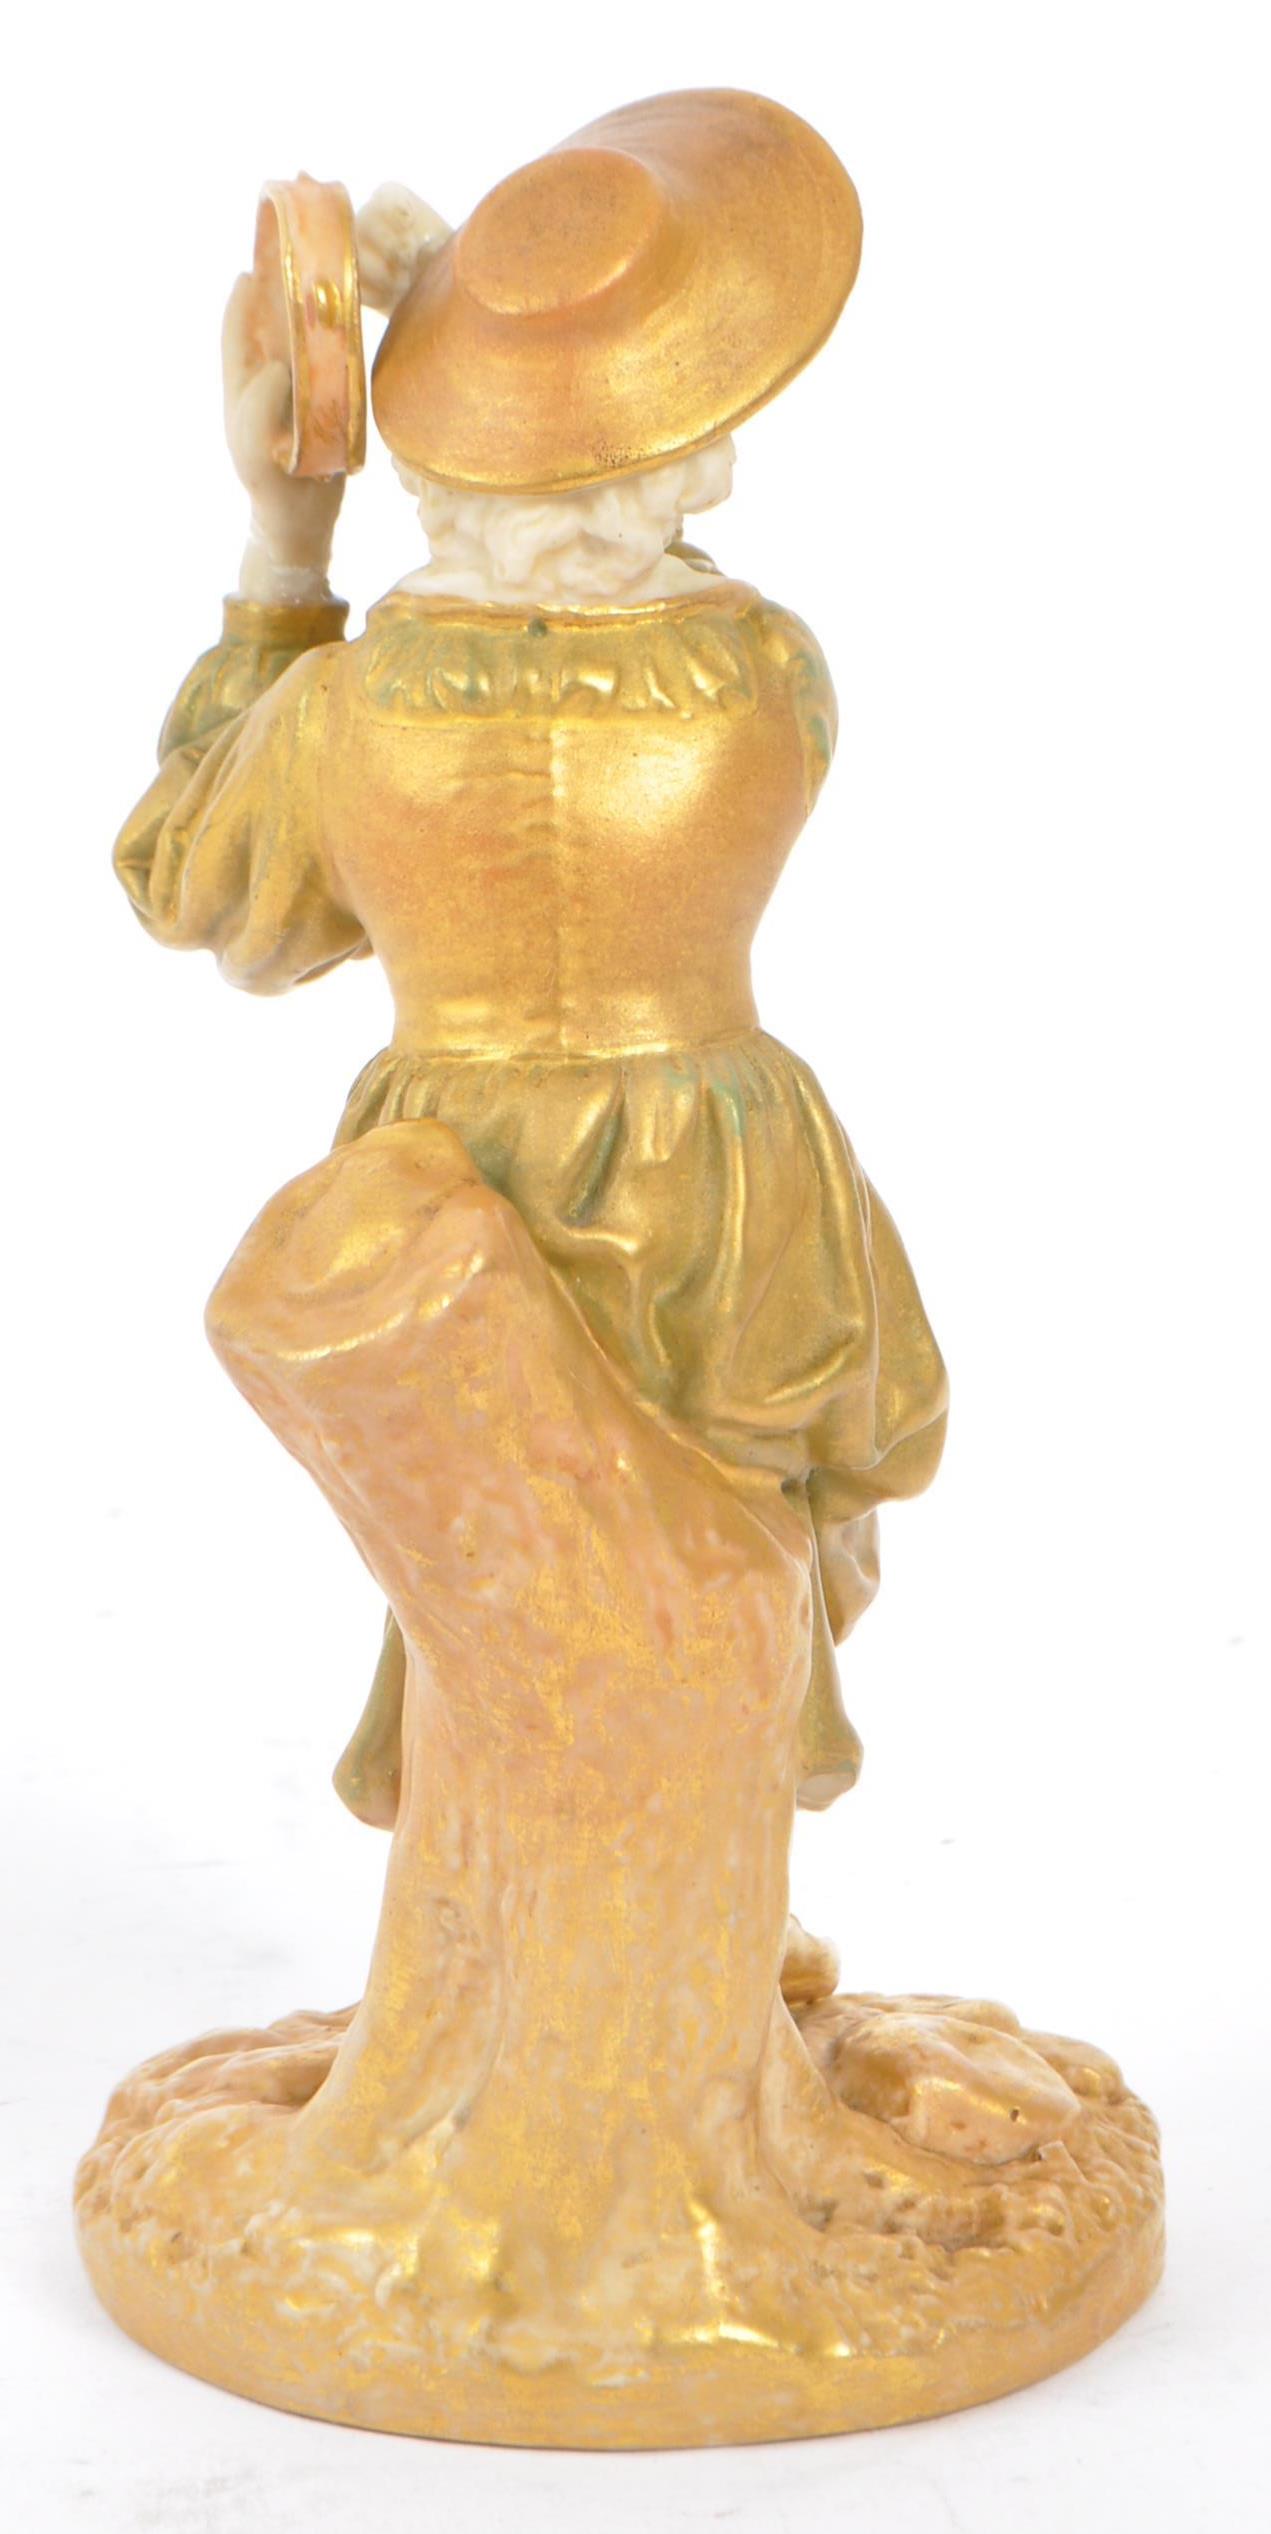 ROYAL WORCESTER PHYLISS BONE CHINA FIGURINE - PHYLISS - Image 4 of 5